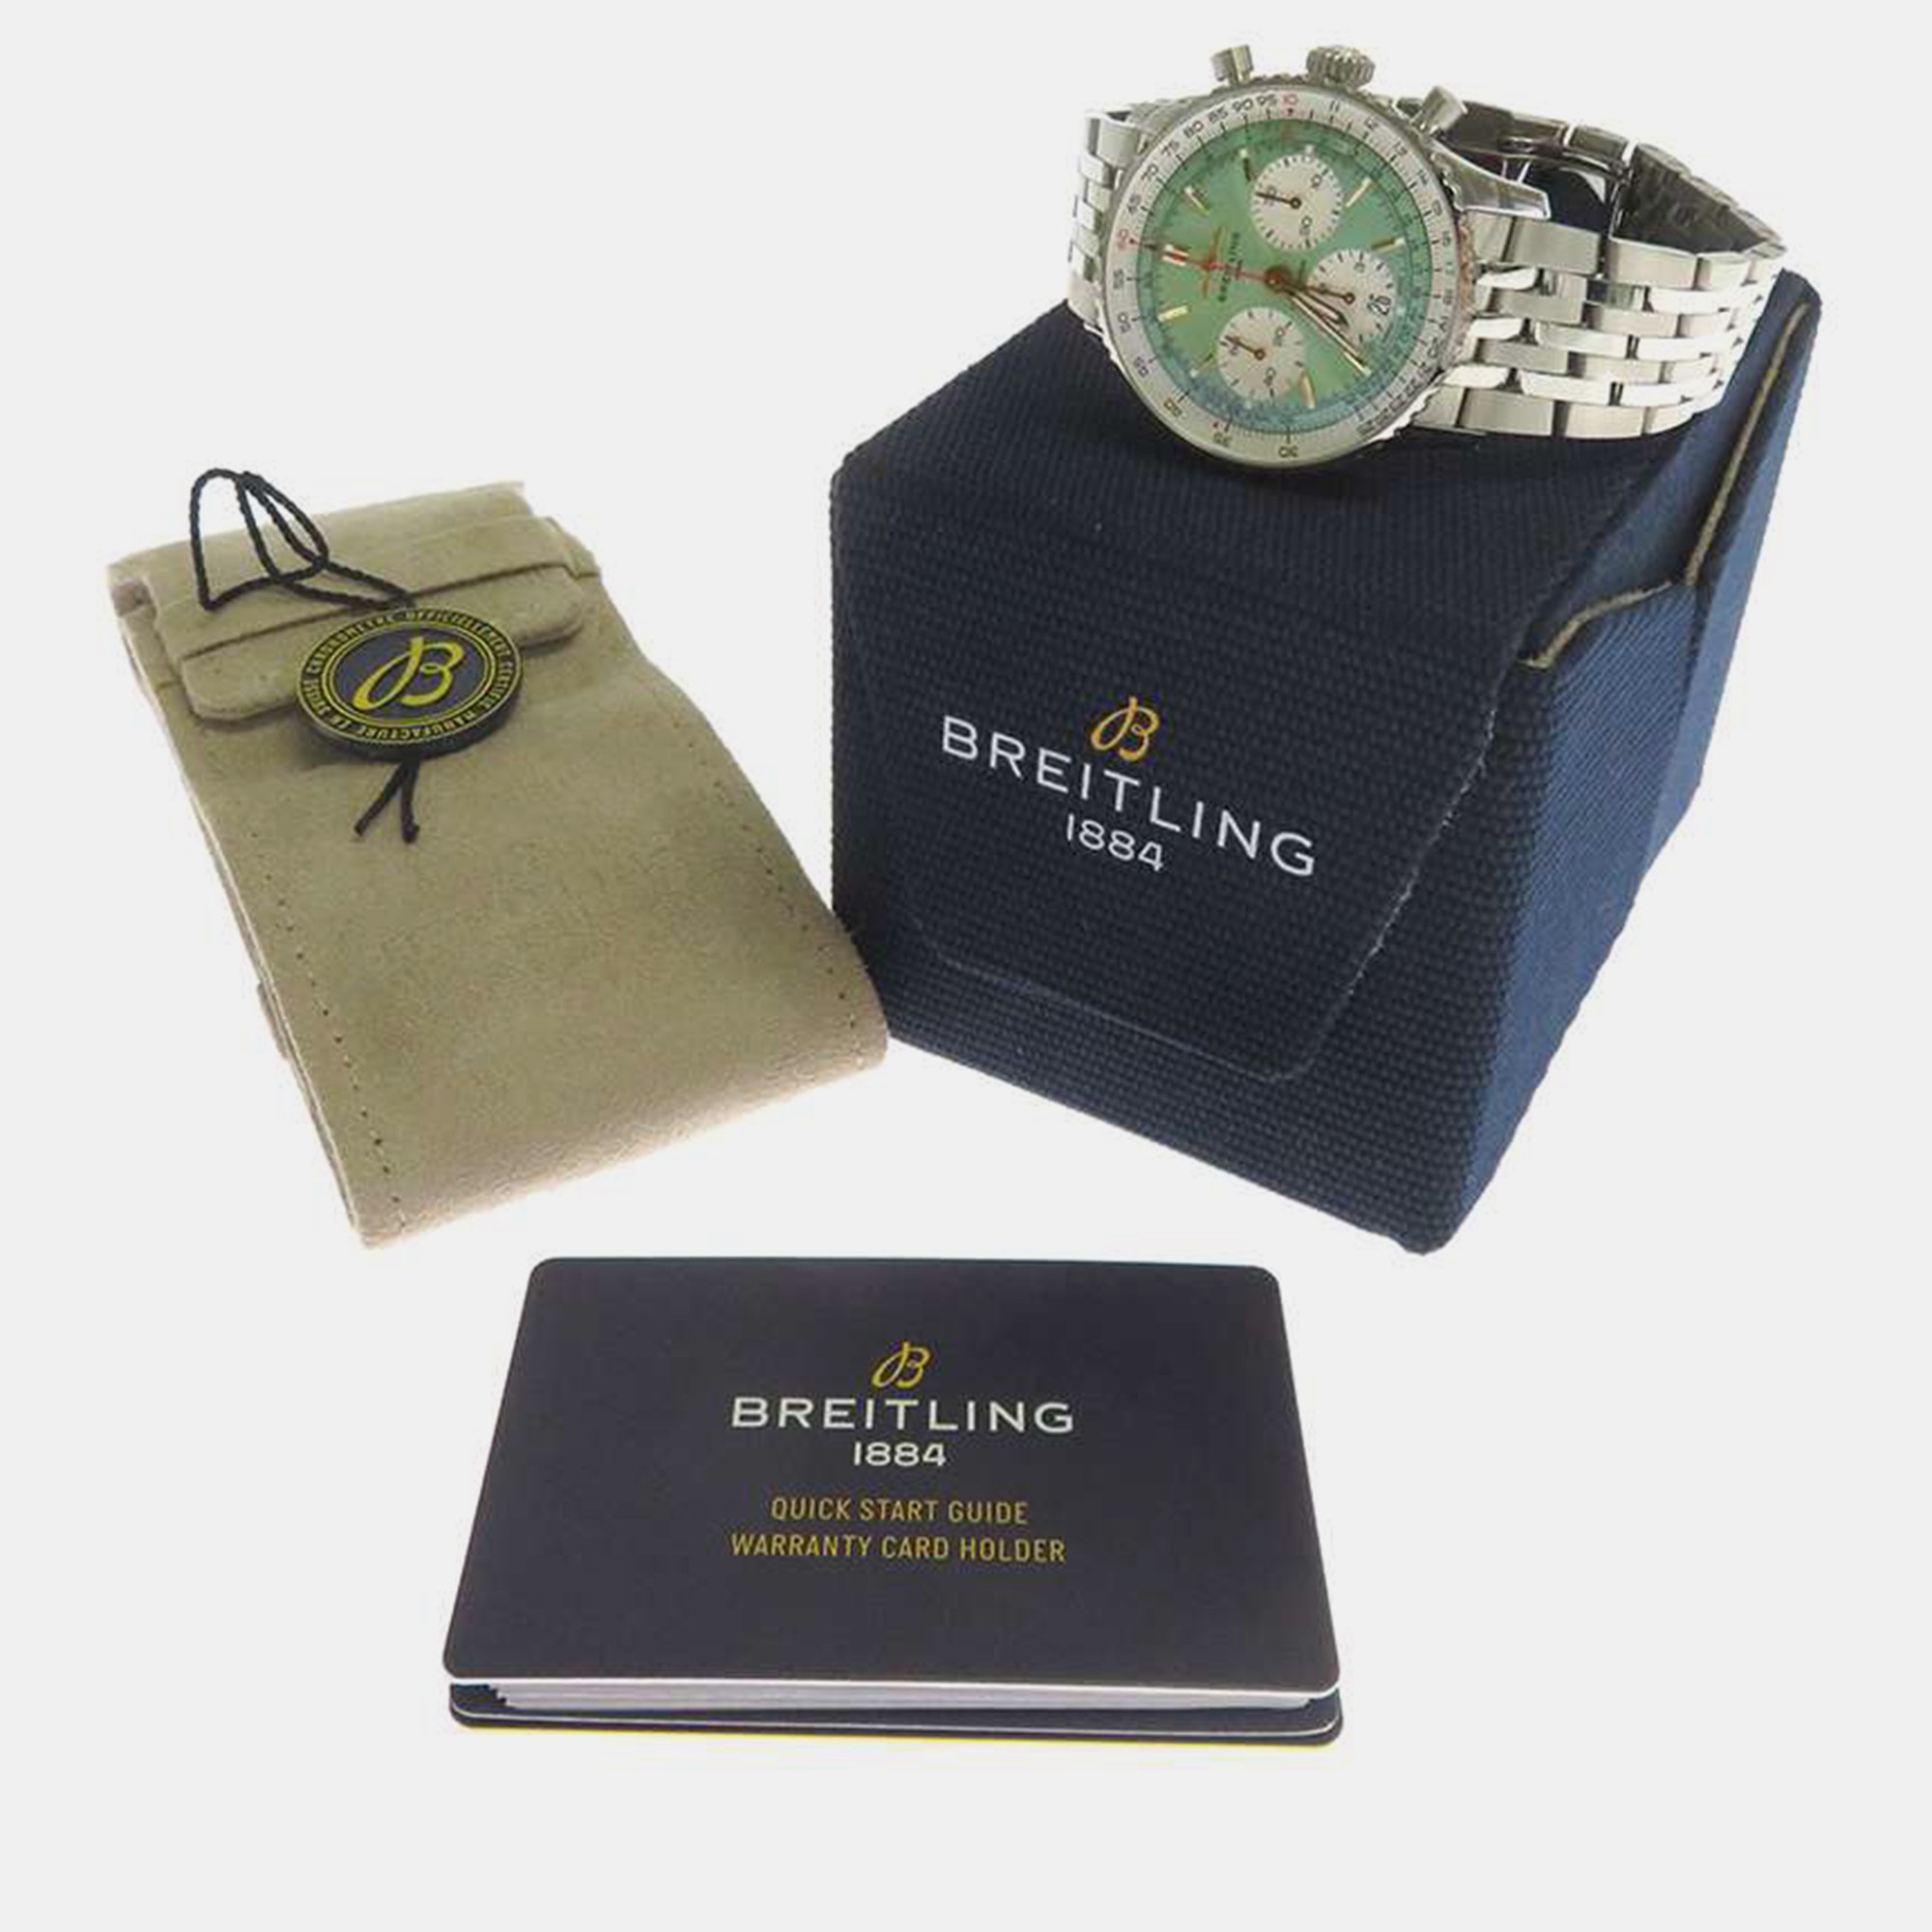 Breitling Green Stainless Steel Navitimer AB0139211L1A1 Automatic Men's Wristwatch 41 Mm